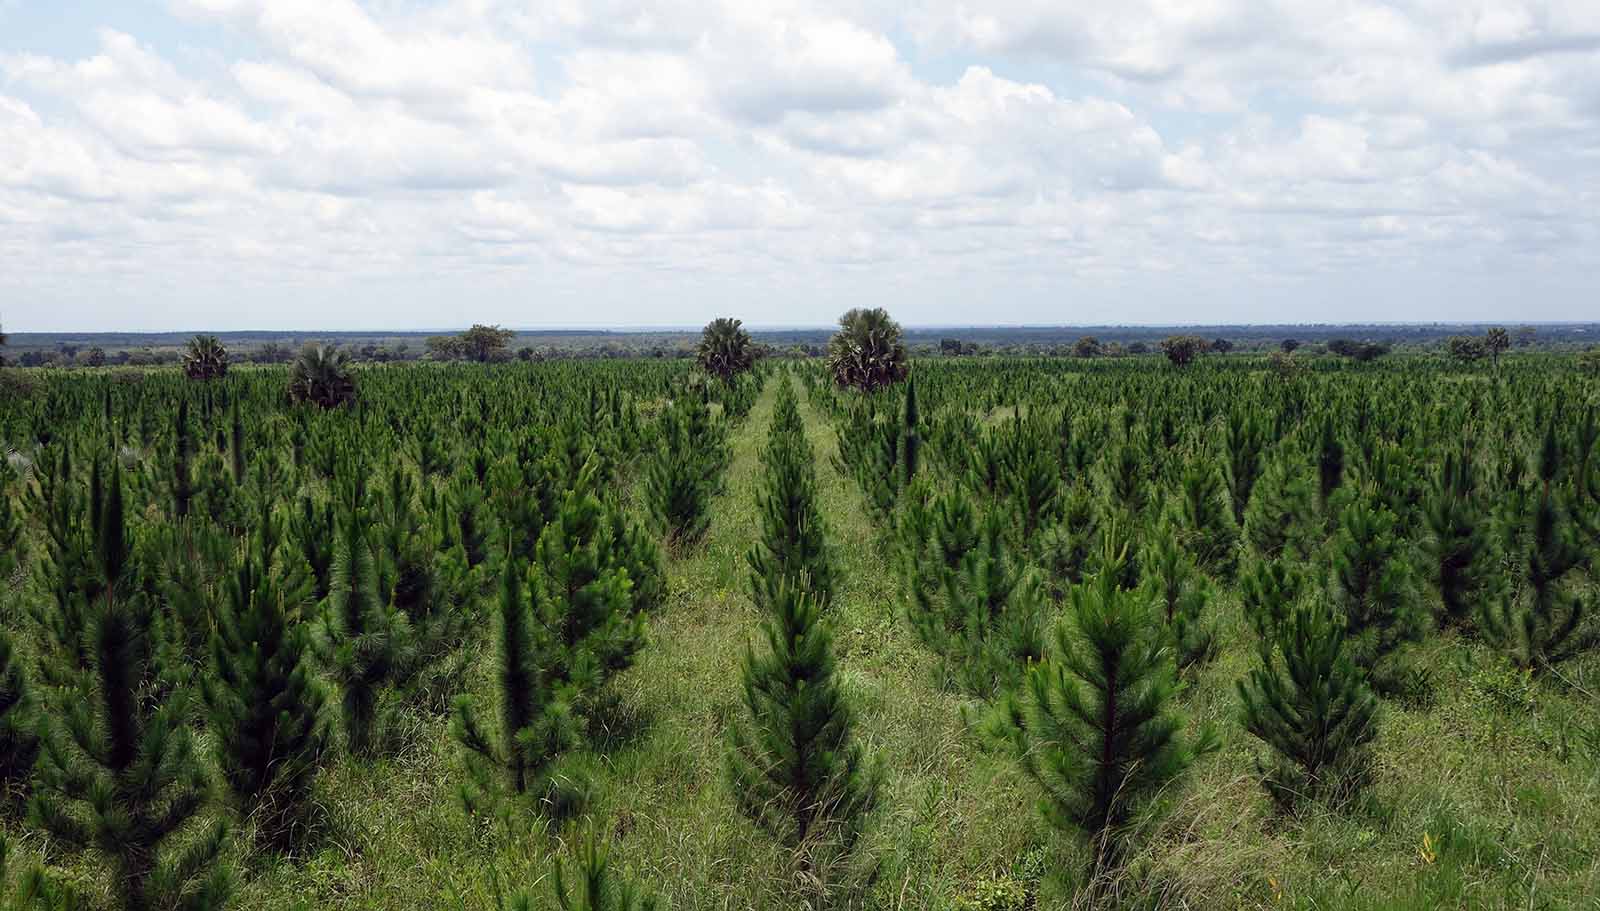 A view of an industrial pine plantation with trees in rows to the horizon